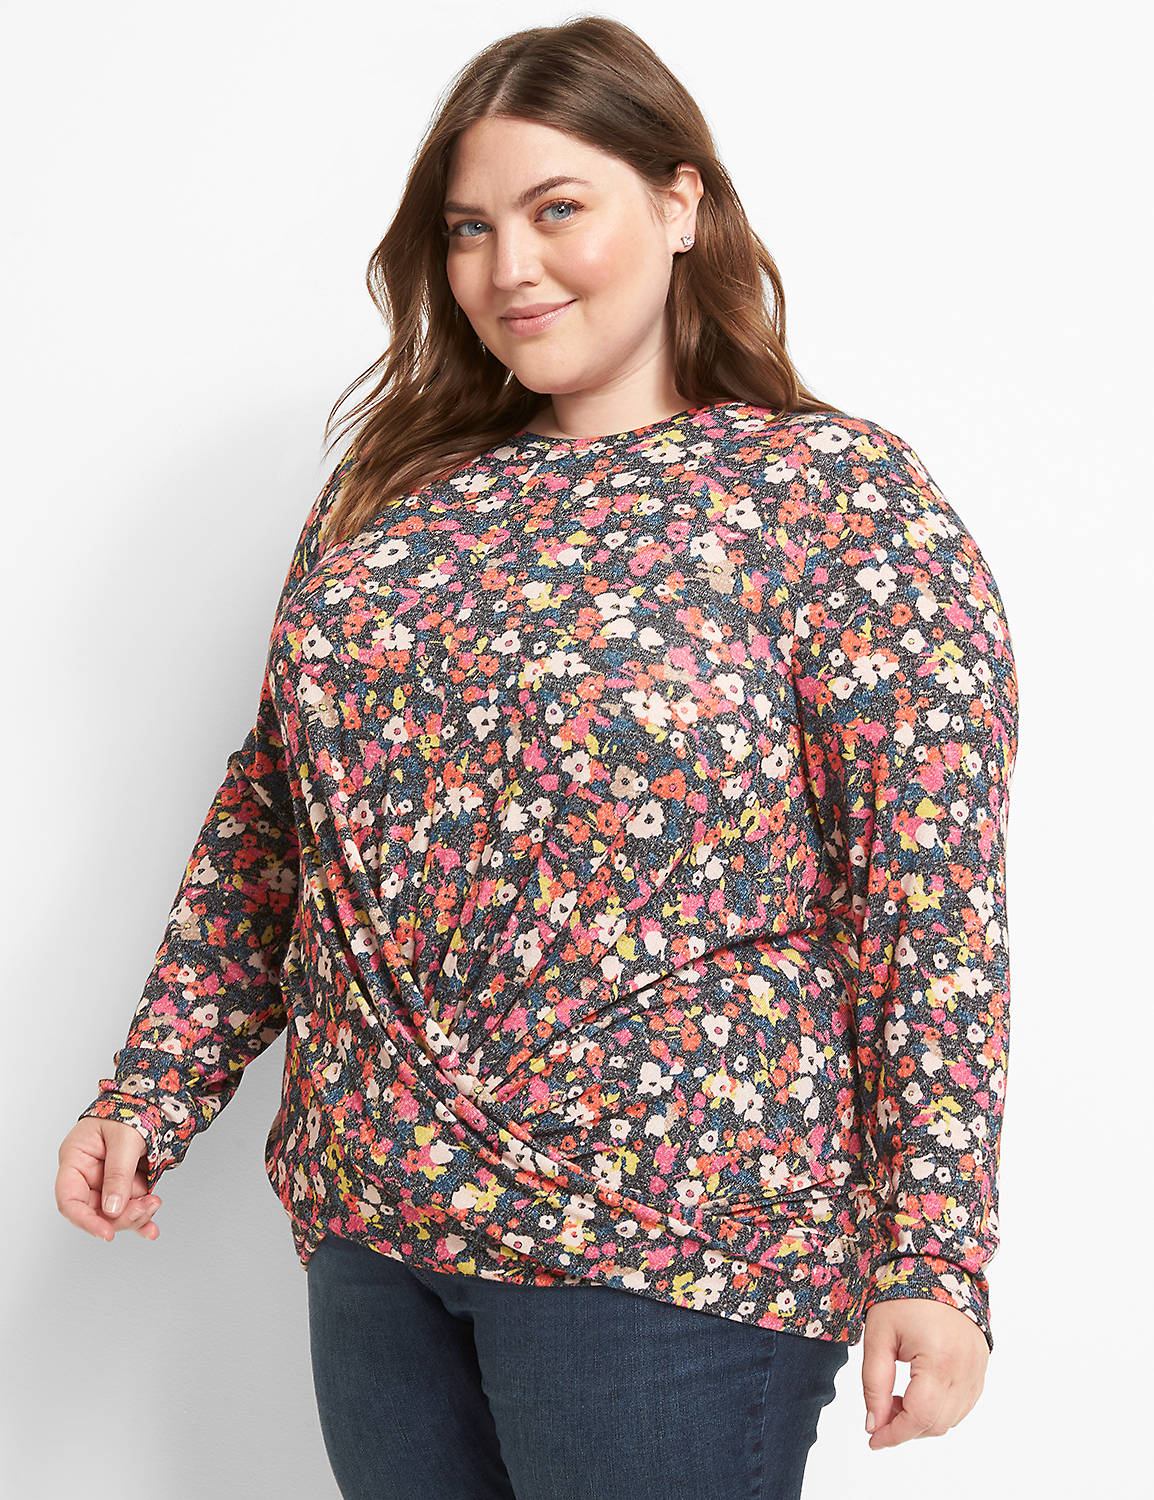 Long Sleeve Crew Neck Illusion Top 1123128 copy of 1122516:LBF21117ConfettiFlowers_CW2:14/16 Product Image 1